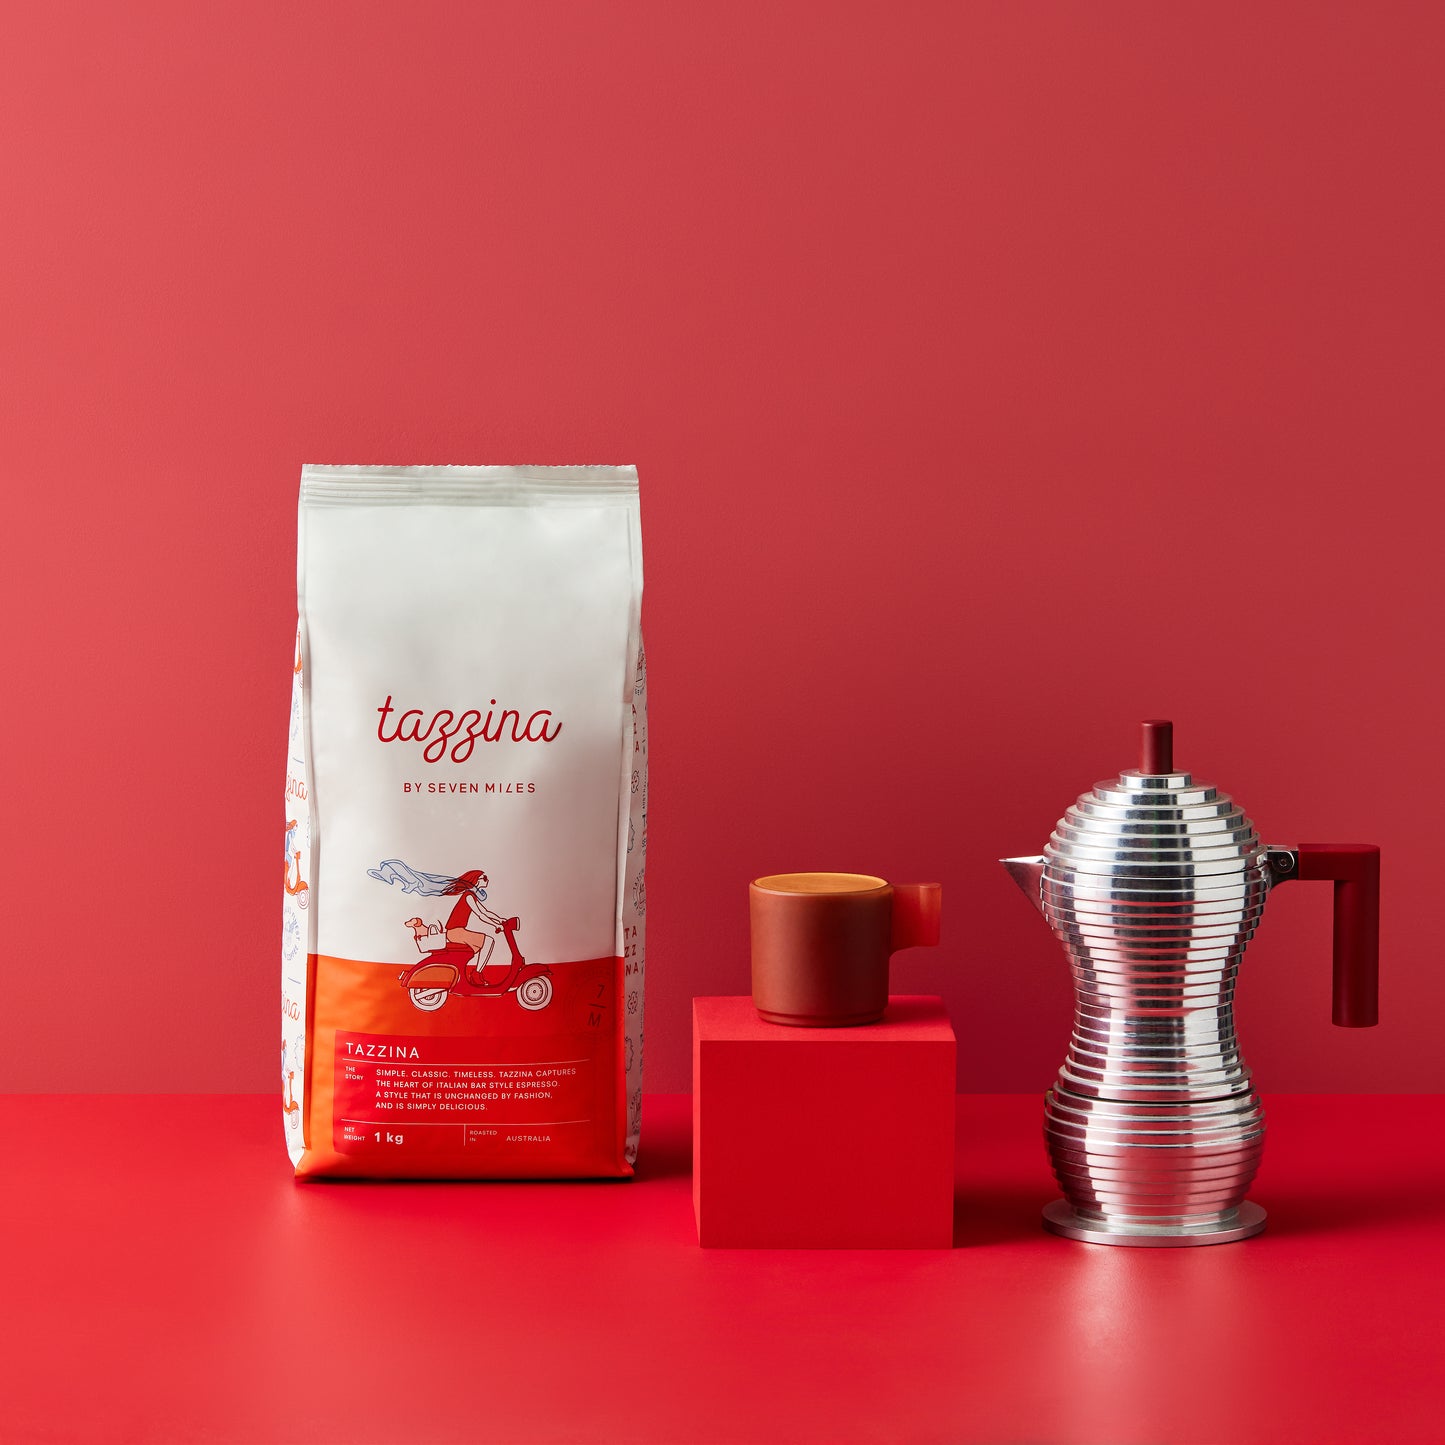 Tazzina Cafe 1kg coffee bag. One red glass coffee cup on a red box with a metal mokka pot. 